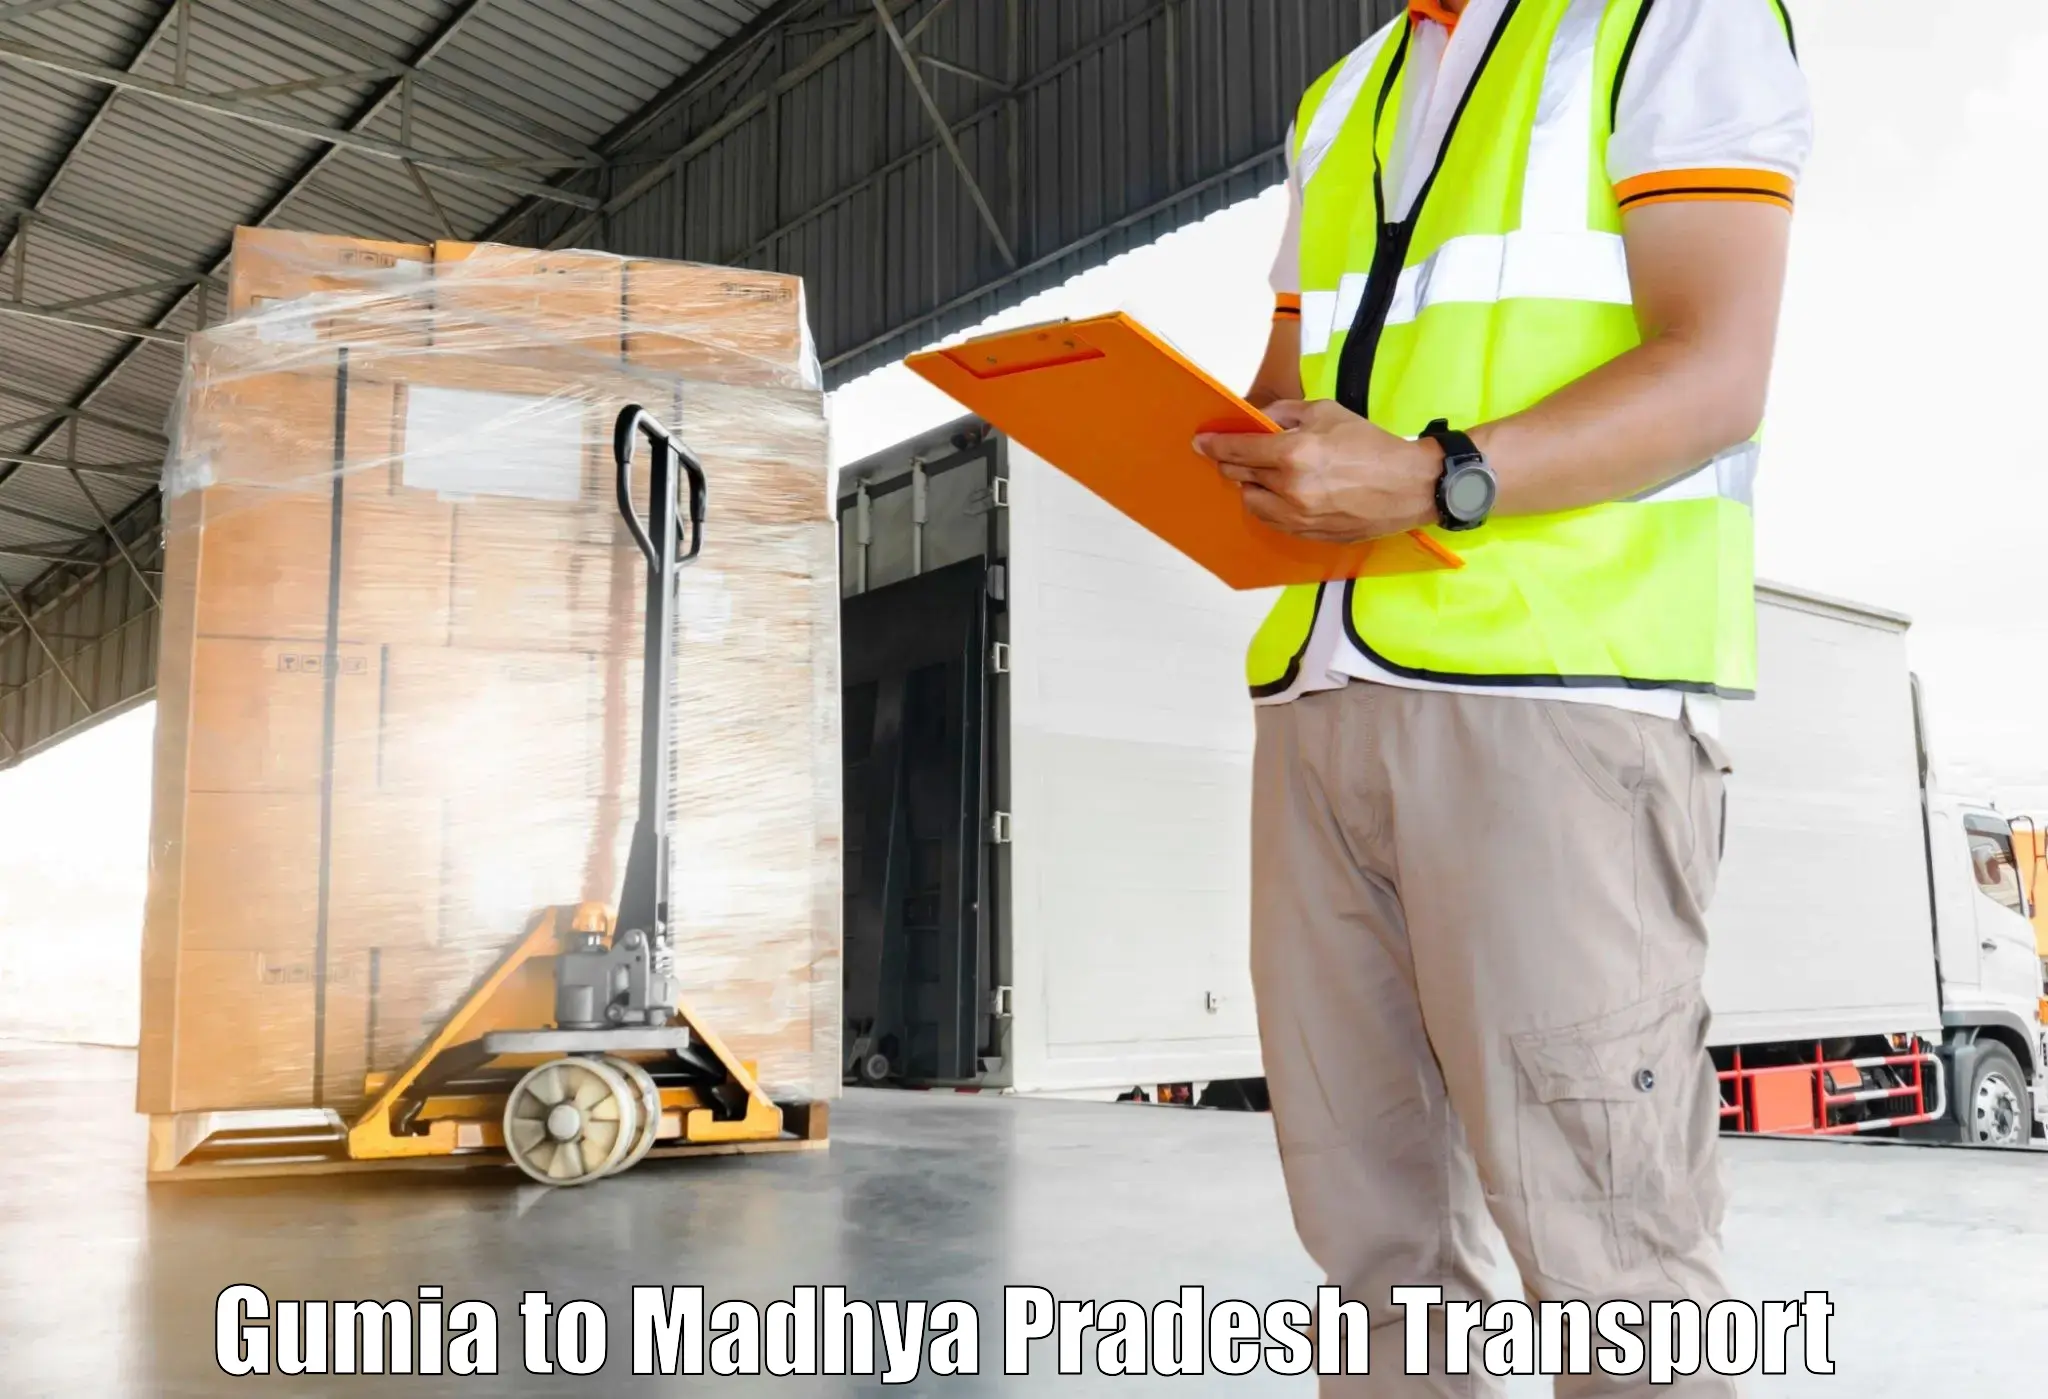 Cycle transportation service Gumia to Madwas